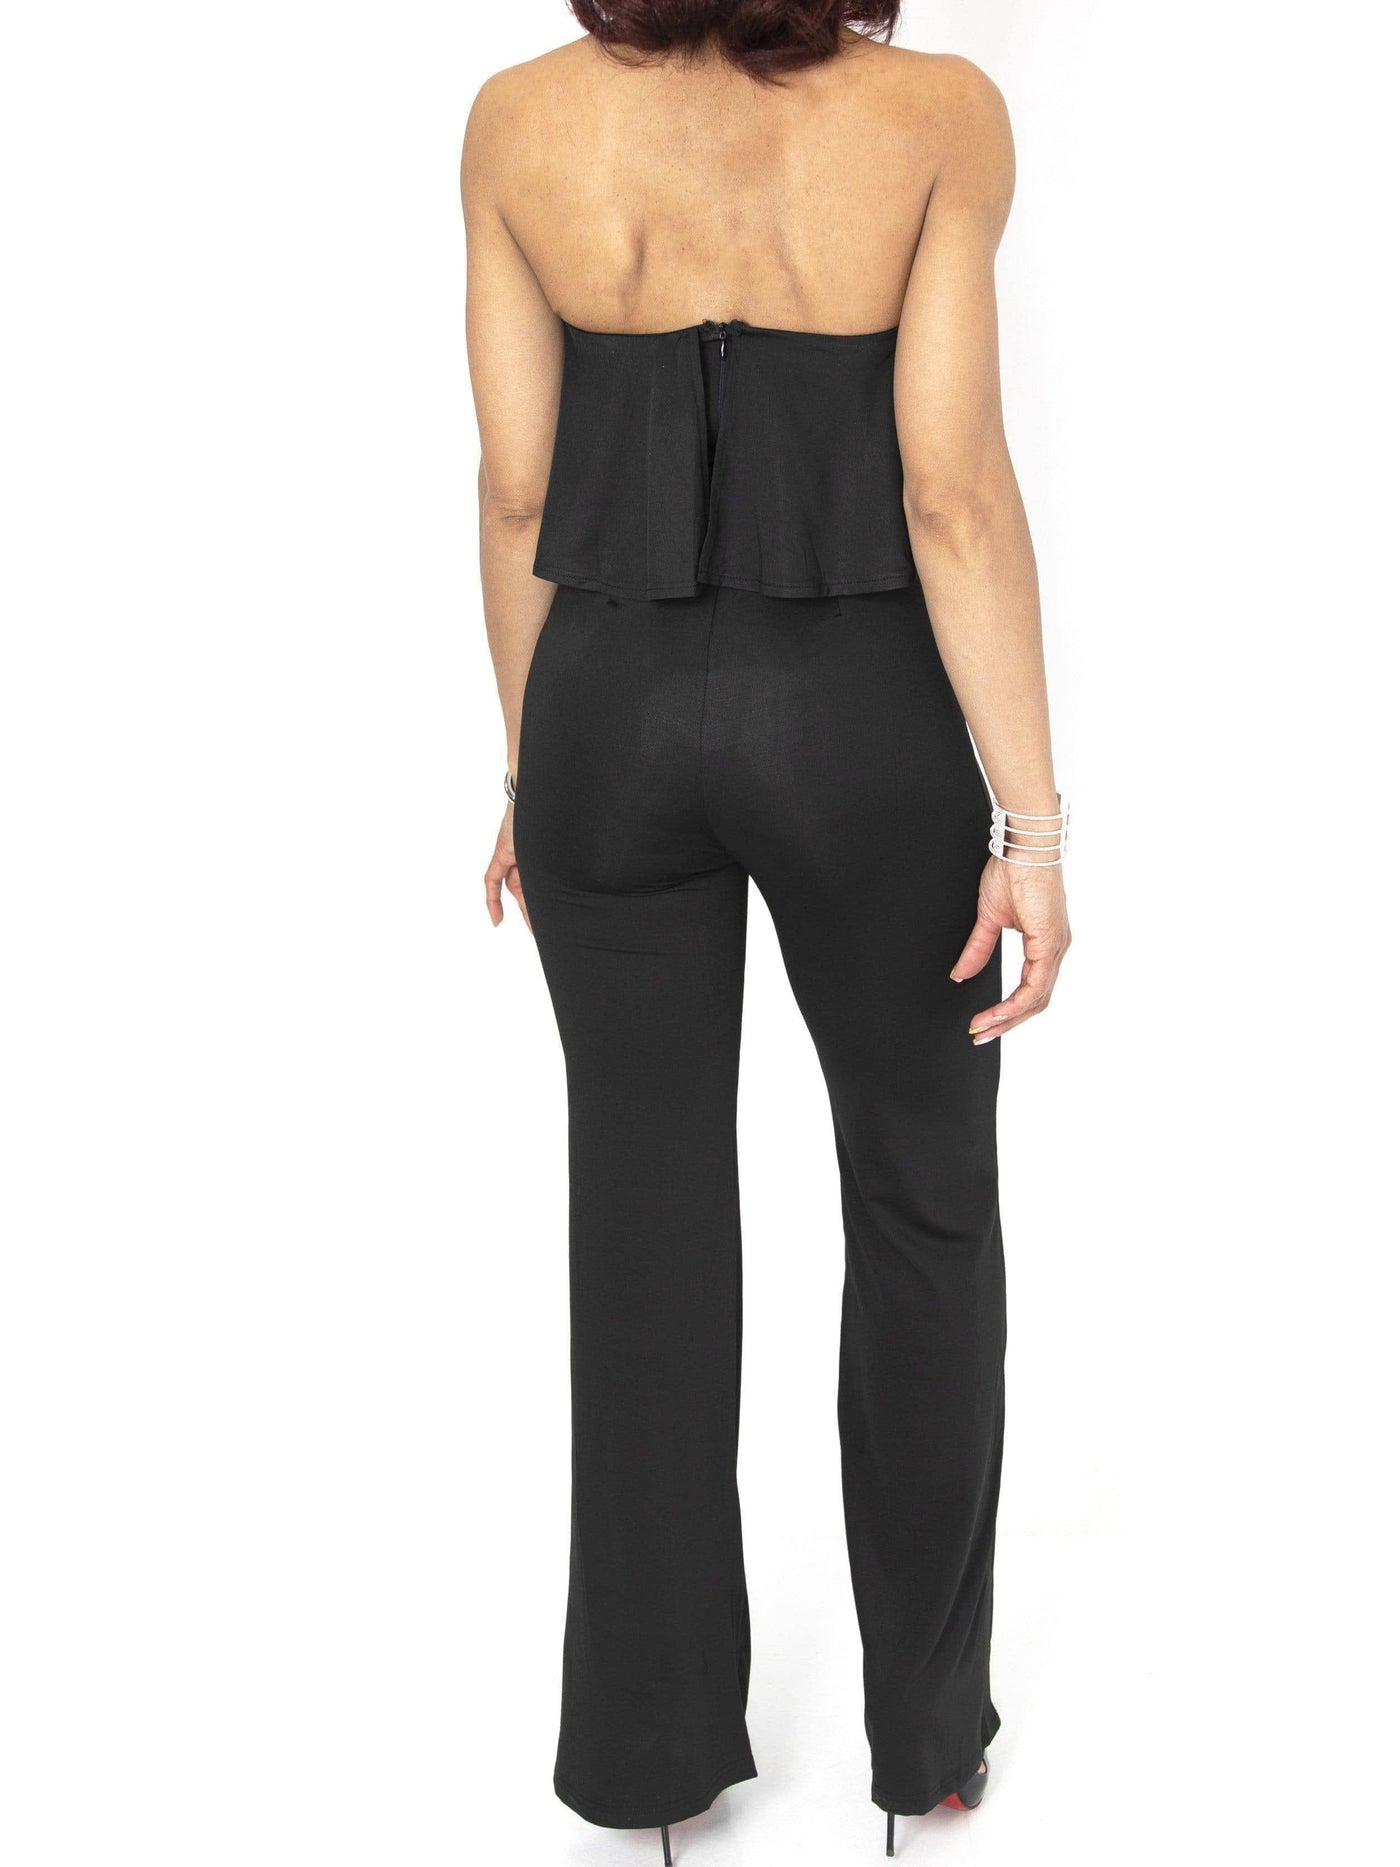 Show My Lady! | Black Jumpsuit - Statement Piece NY _tab_size-chart, Black, Brooklyn Boutique, chic, classy, Colorful, cute dress, cute dresses for women, dress, Dresses, dresses & jumpsuits, Dresses & Skirts, final sale, jumpsuit, Long Pants, Misses, Monochrome, not clearance, romper, rompers, Ships from USA, SPNY Exclusive, statement, Statement Clothing, statement piece, Statement Piece Boutique, statement piece ny, Statement Pieces, Statement Pieces Boutique, Women's Boutique Statement Dresses/Jumpsuits